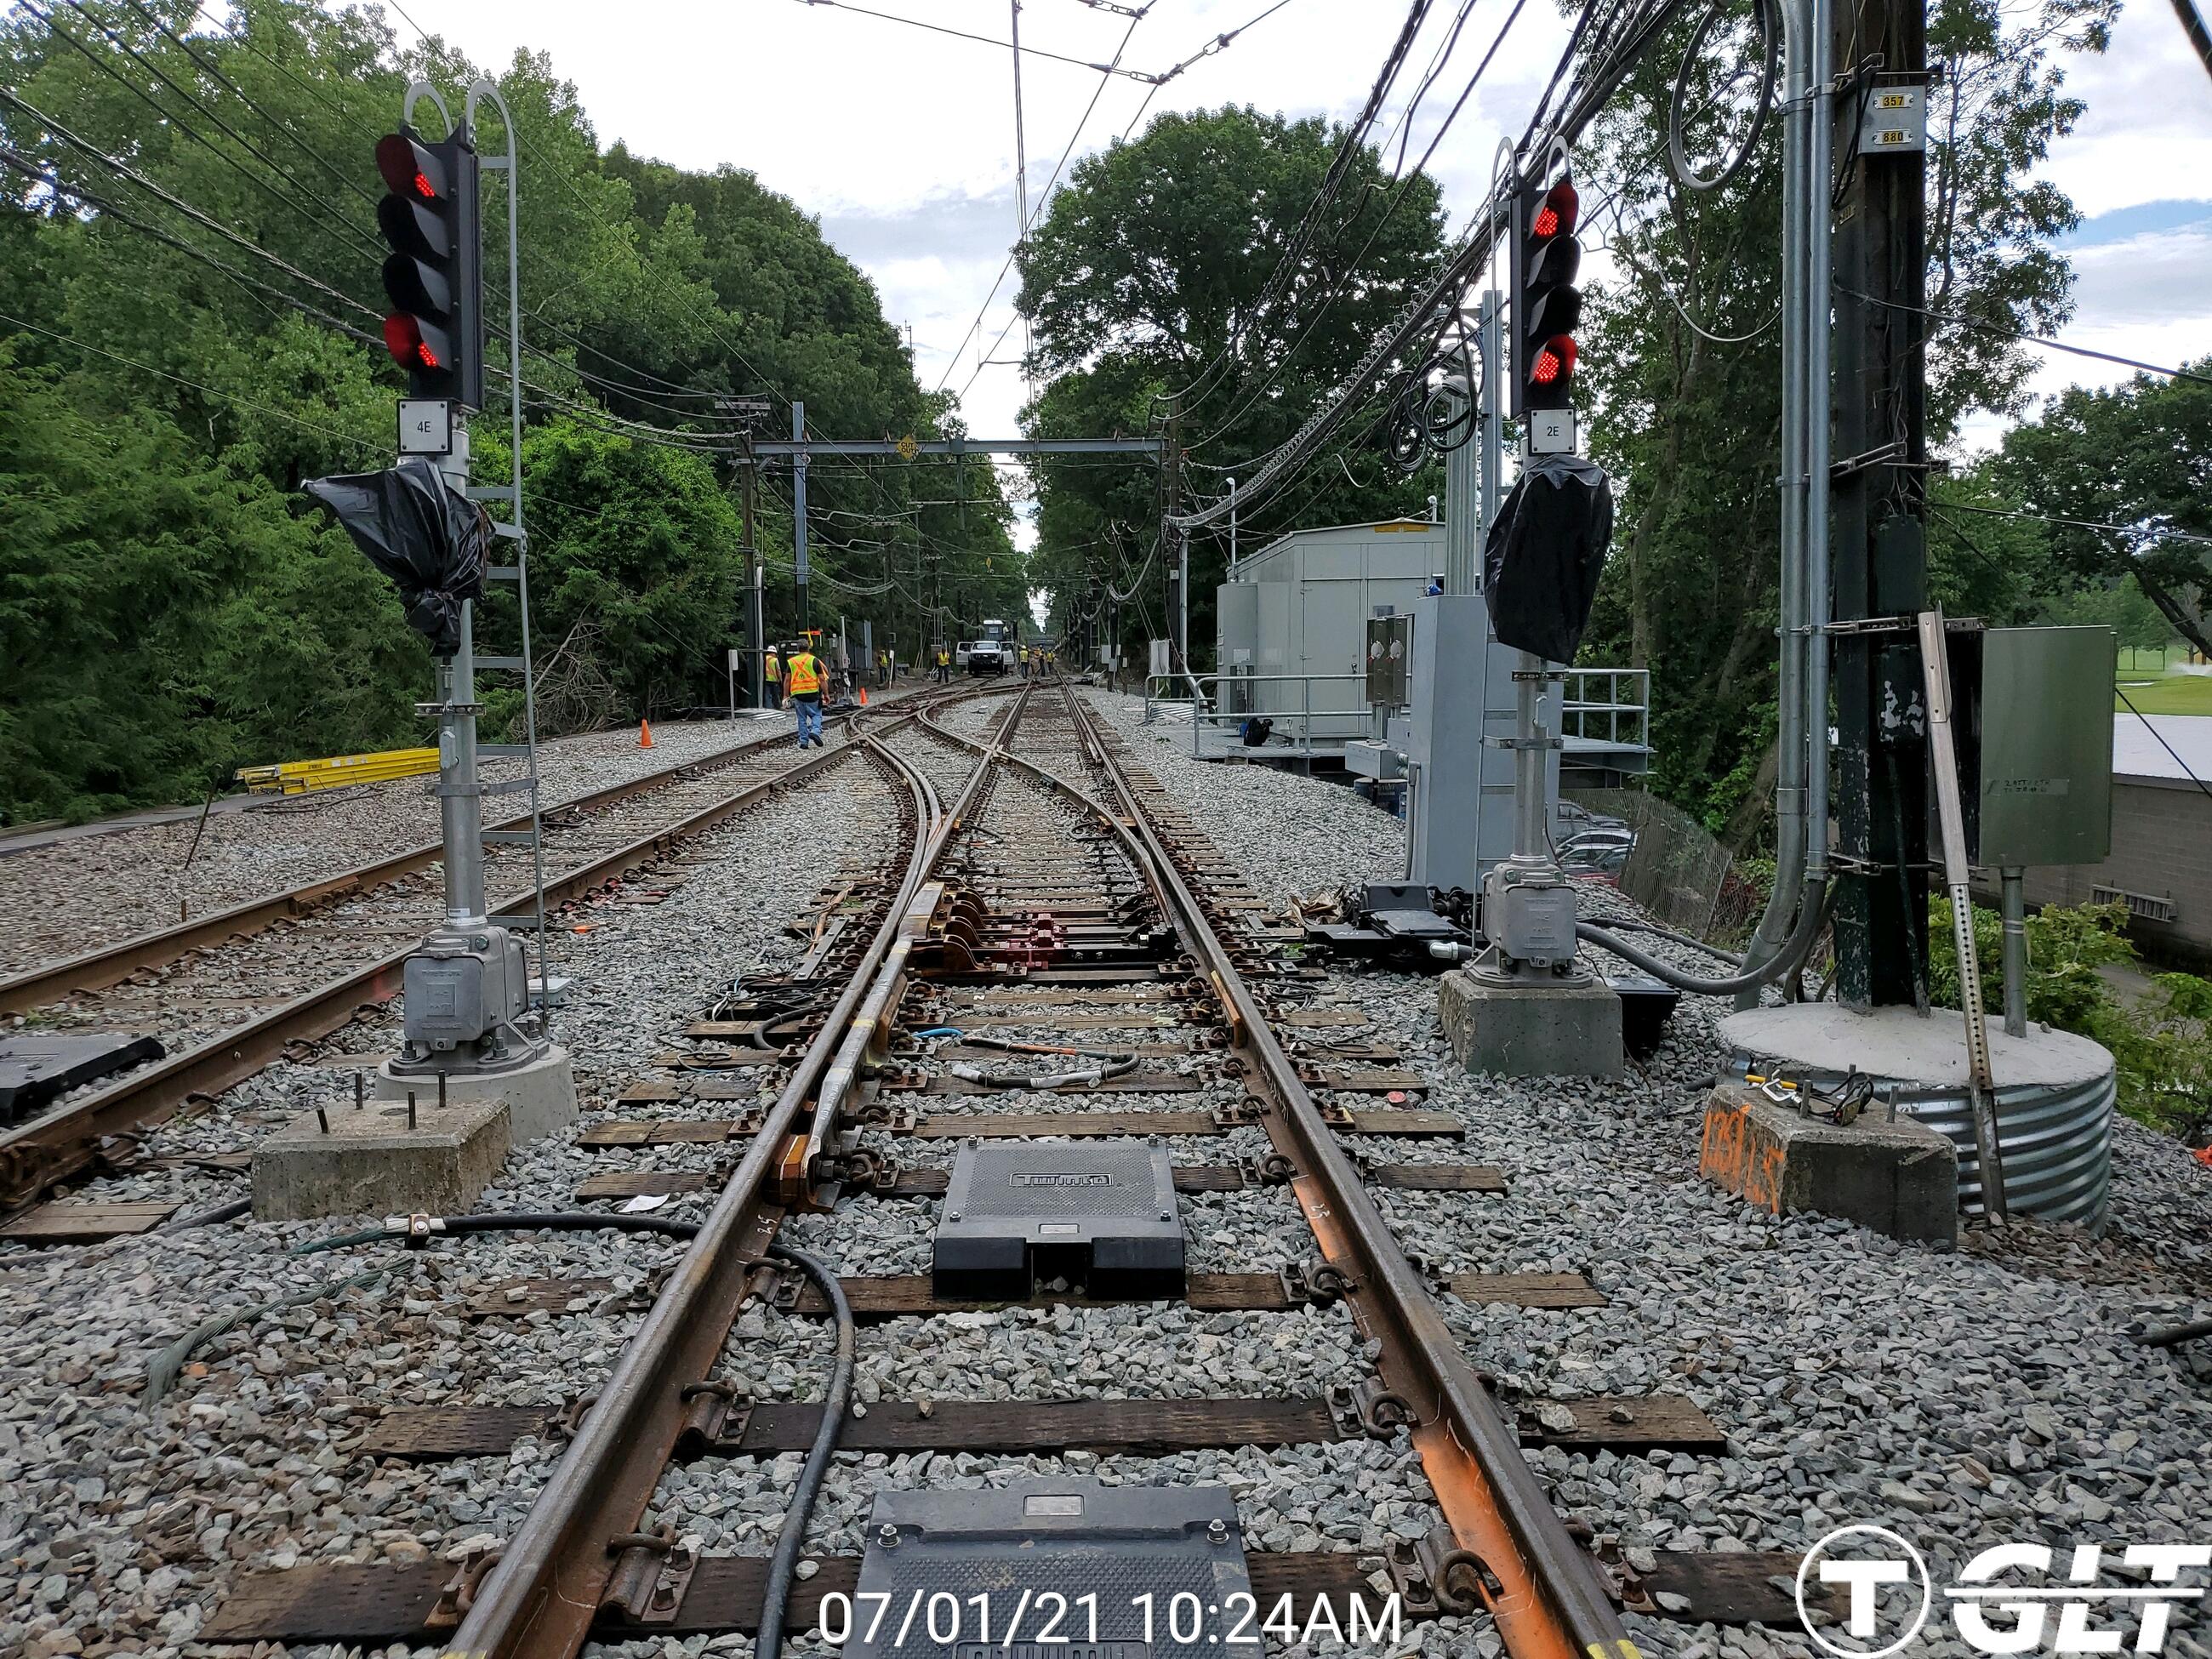 Since June 2018, 25,000 feet of track on the D Branch have been replaced between Riverside and Beaconsfield Stations.